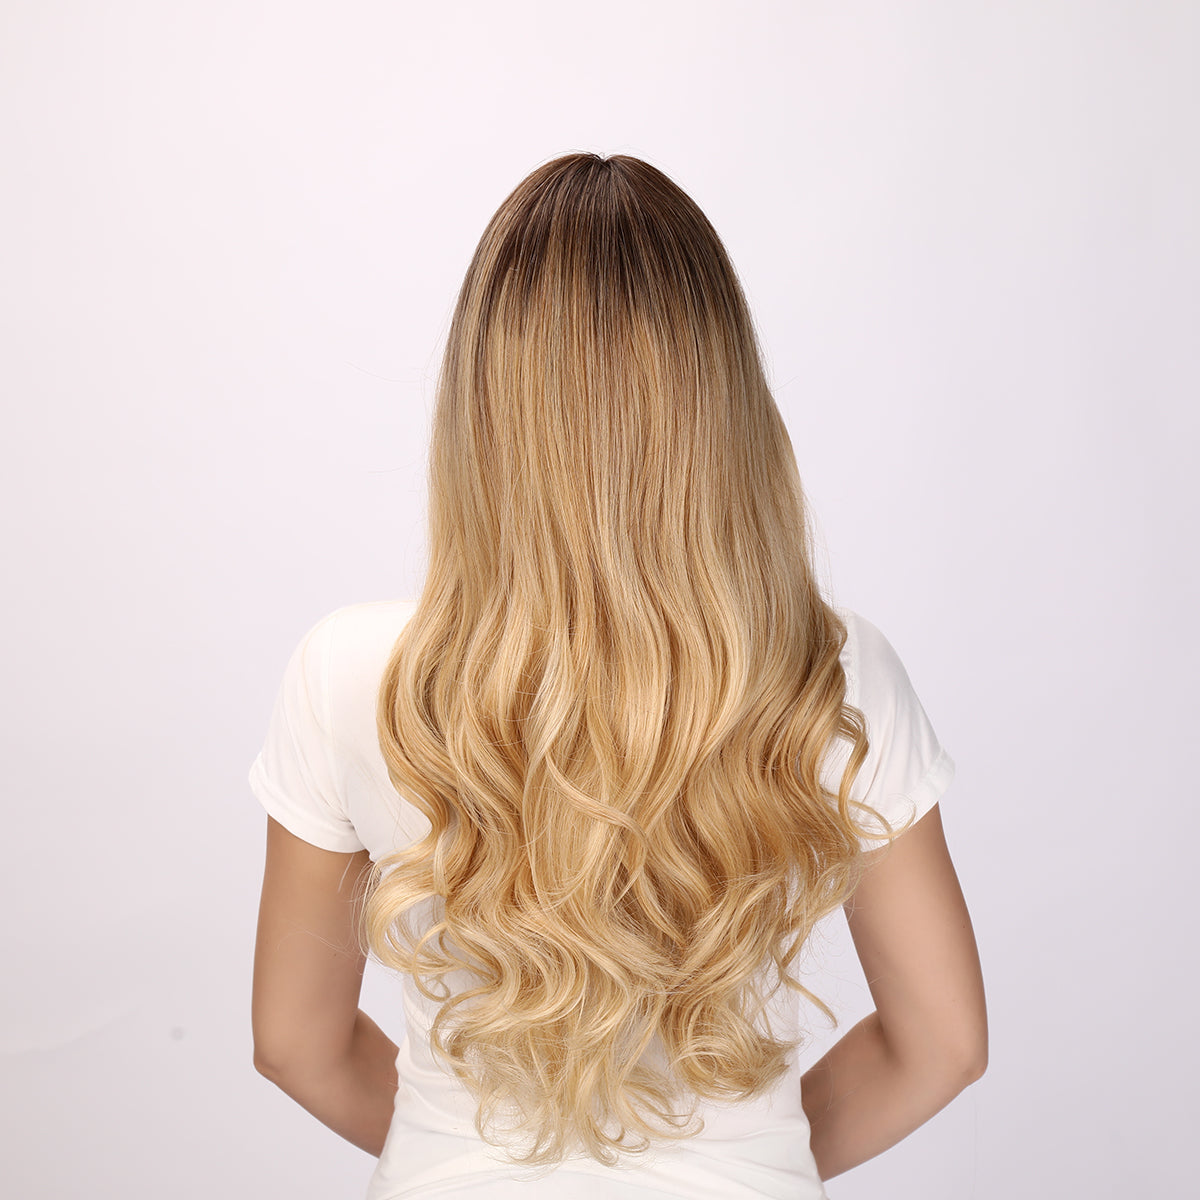 26 Inches | Omber Blonde | Daliy Style | Curly Hair